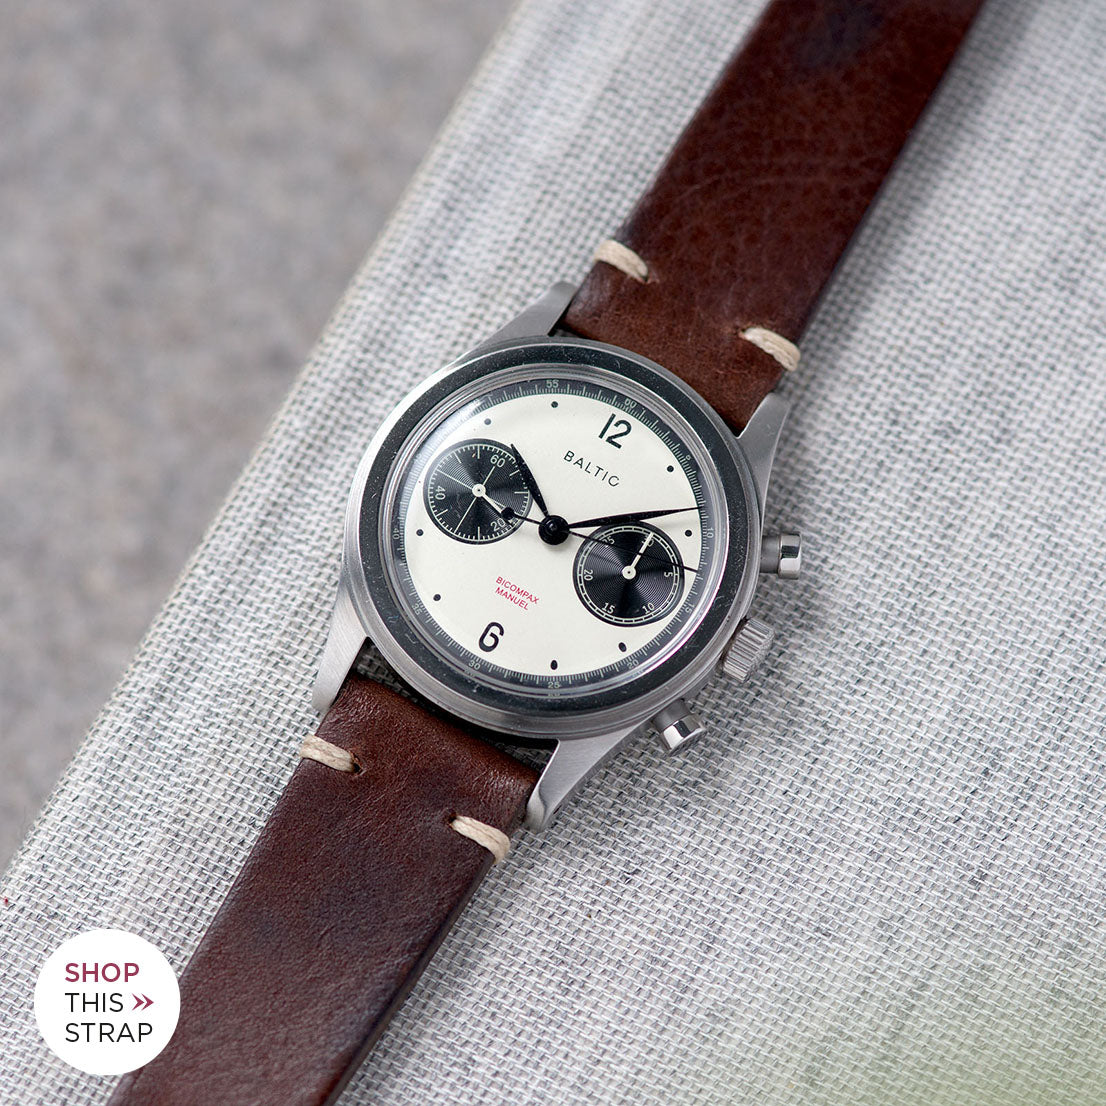 Bulang and Sons_Strap Guide_The Baltic-Chronograph-Panda-Limited-Edition_Lumberjack Brown Leather Watch Strap